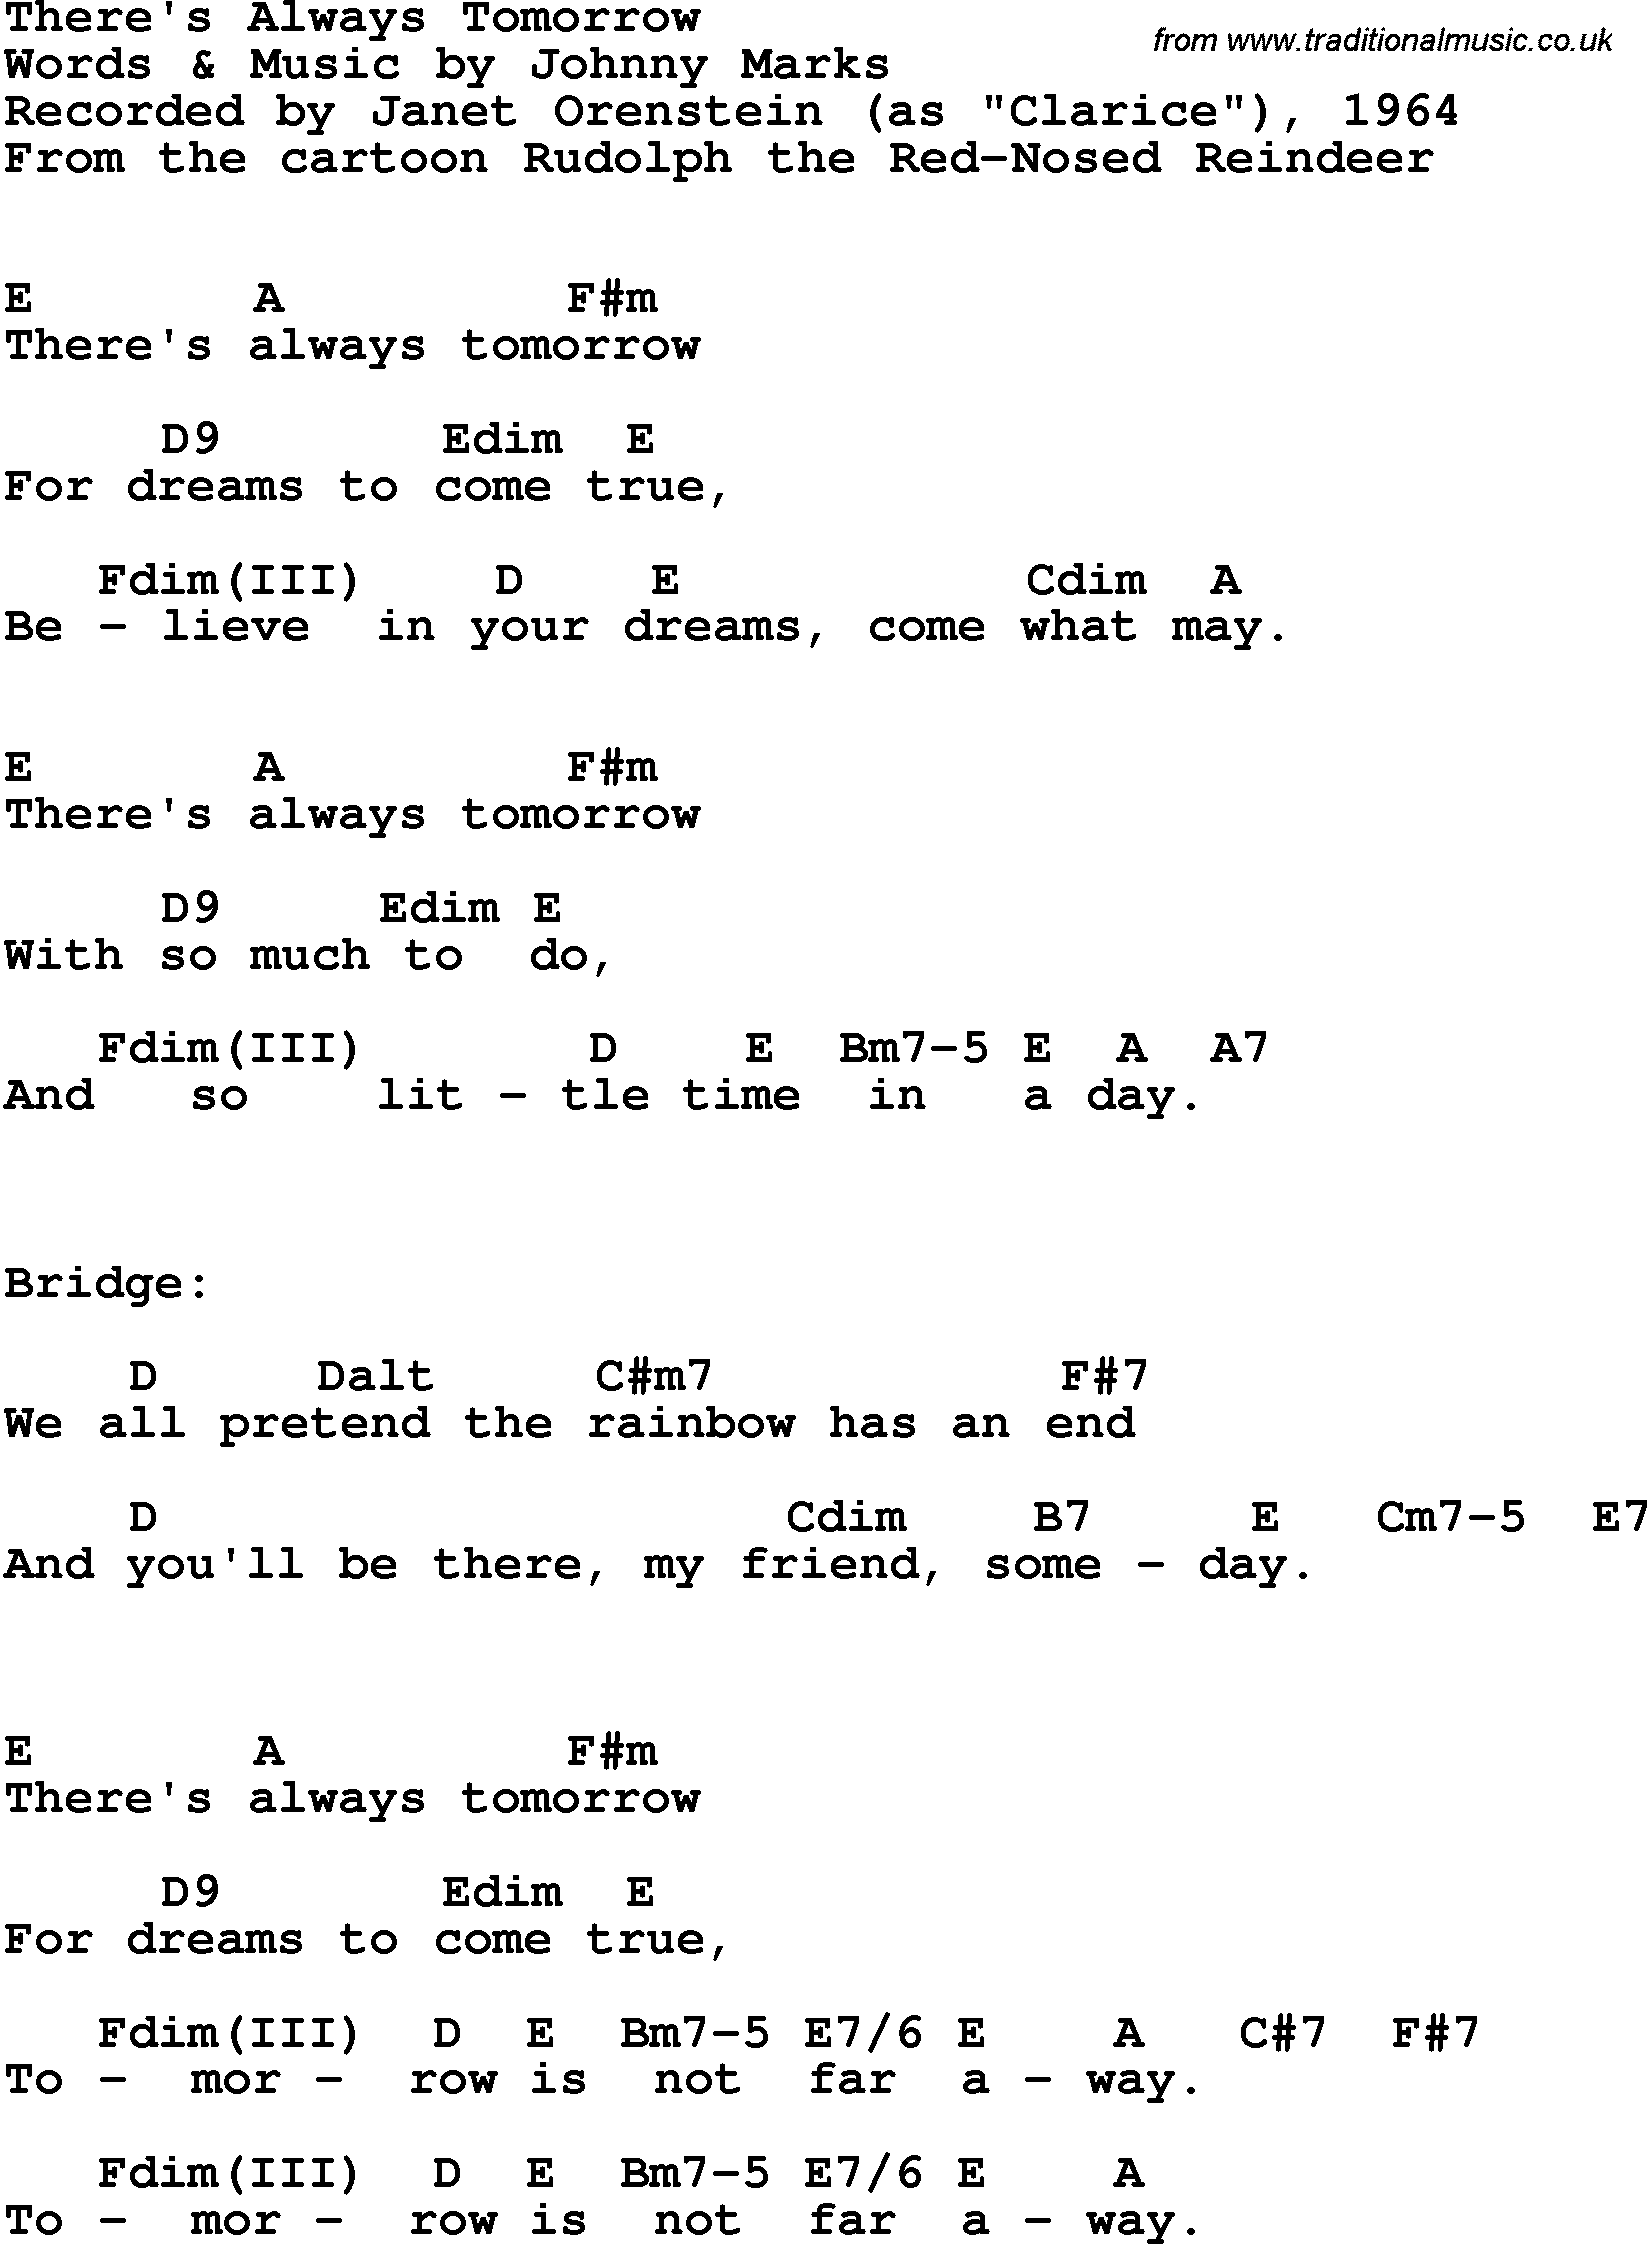 Song Lyrics with guitar chords for There's Always Tomorrow - Janet Orenstein, 1964